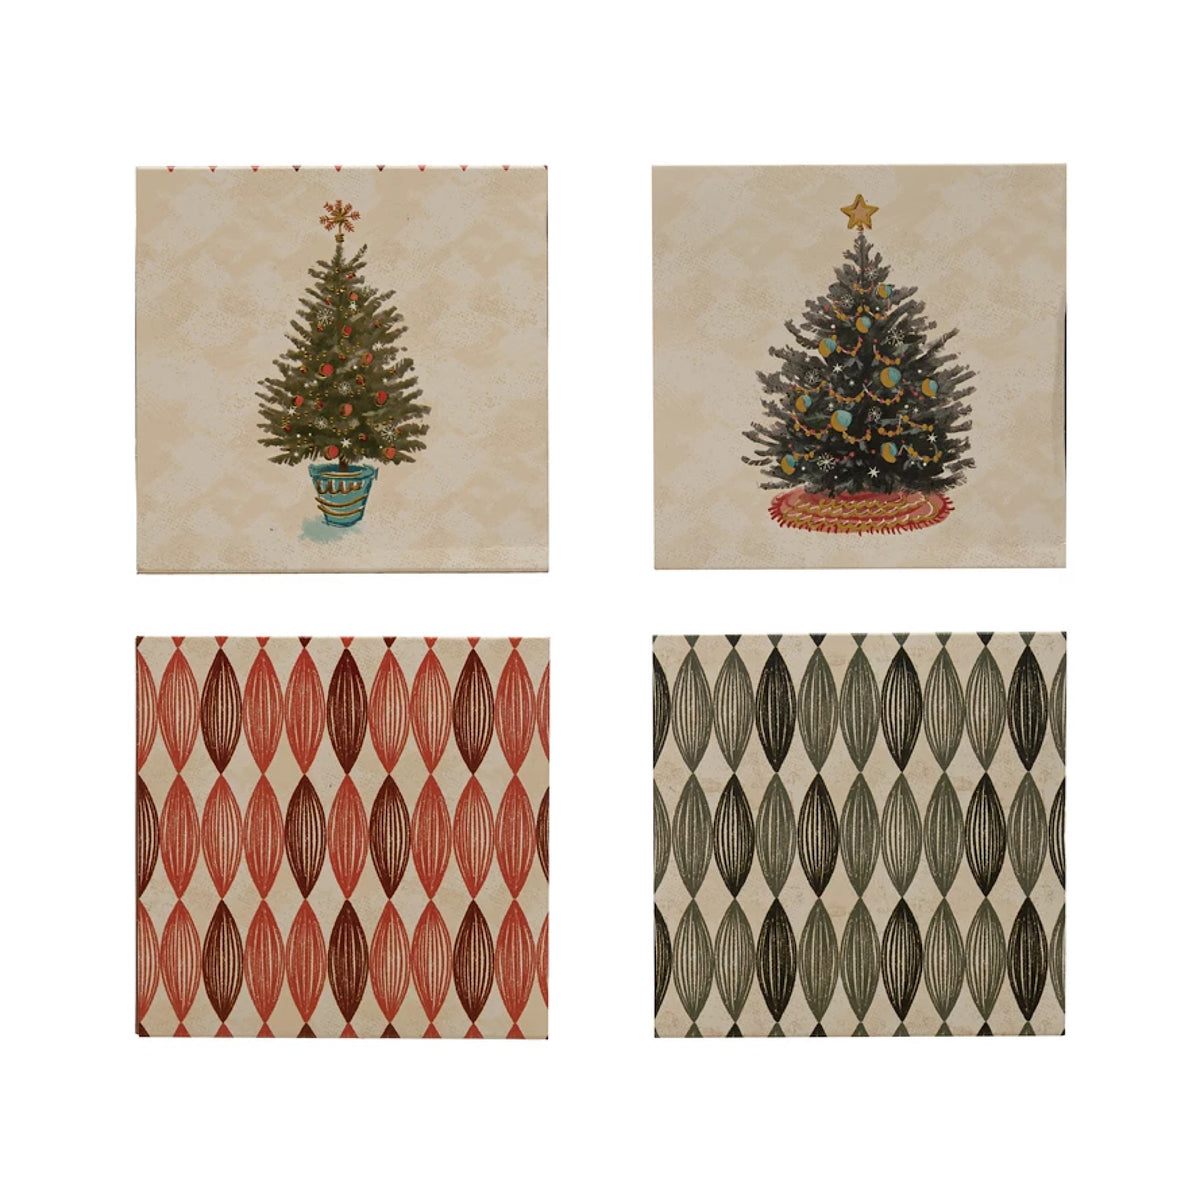 Christmas Tree Matchboxes, 2 Styles